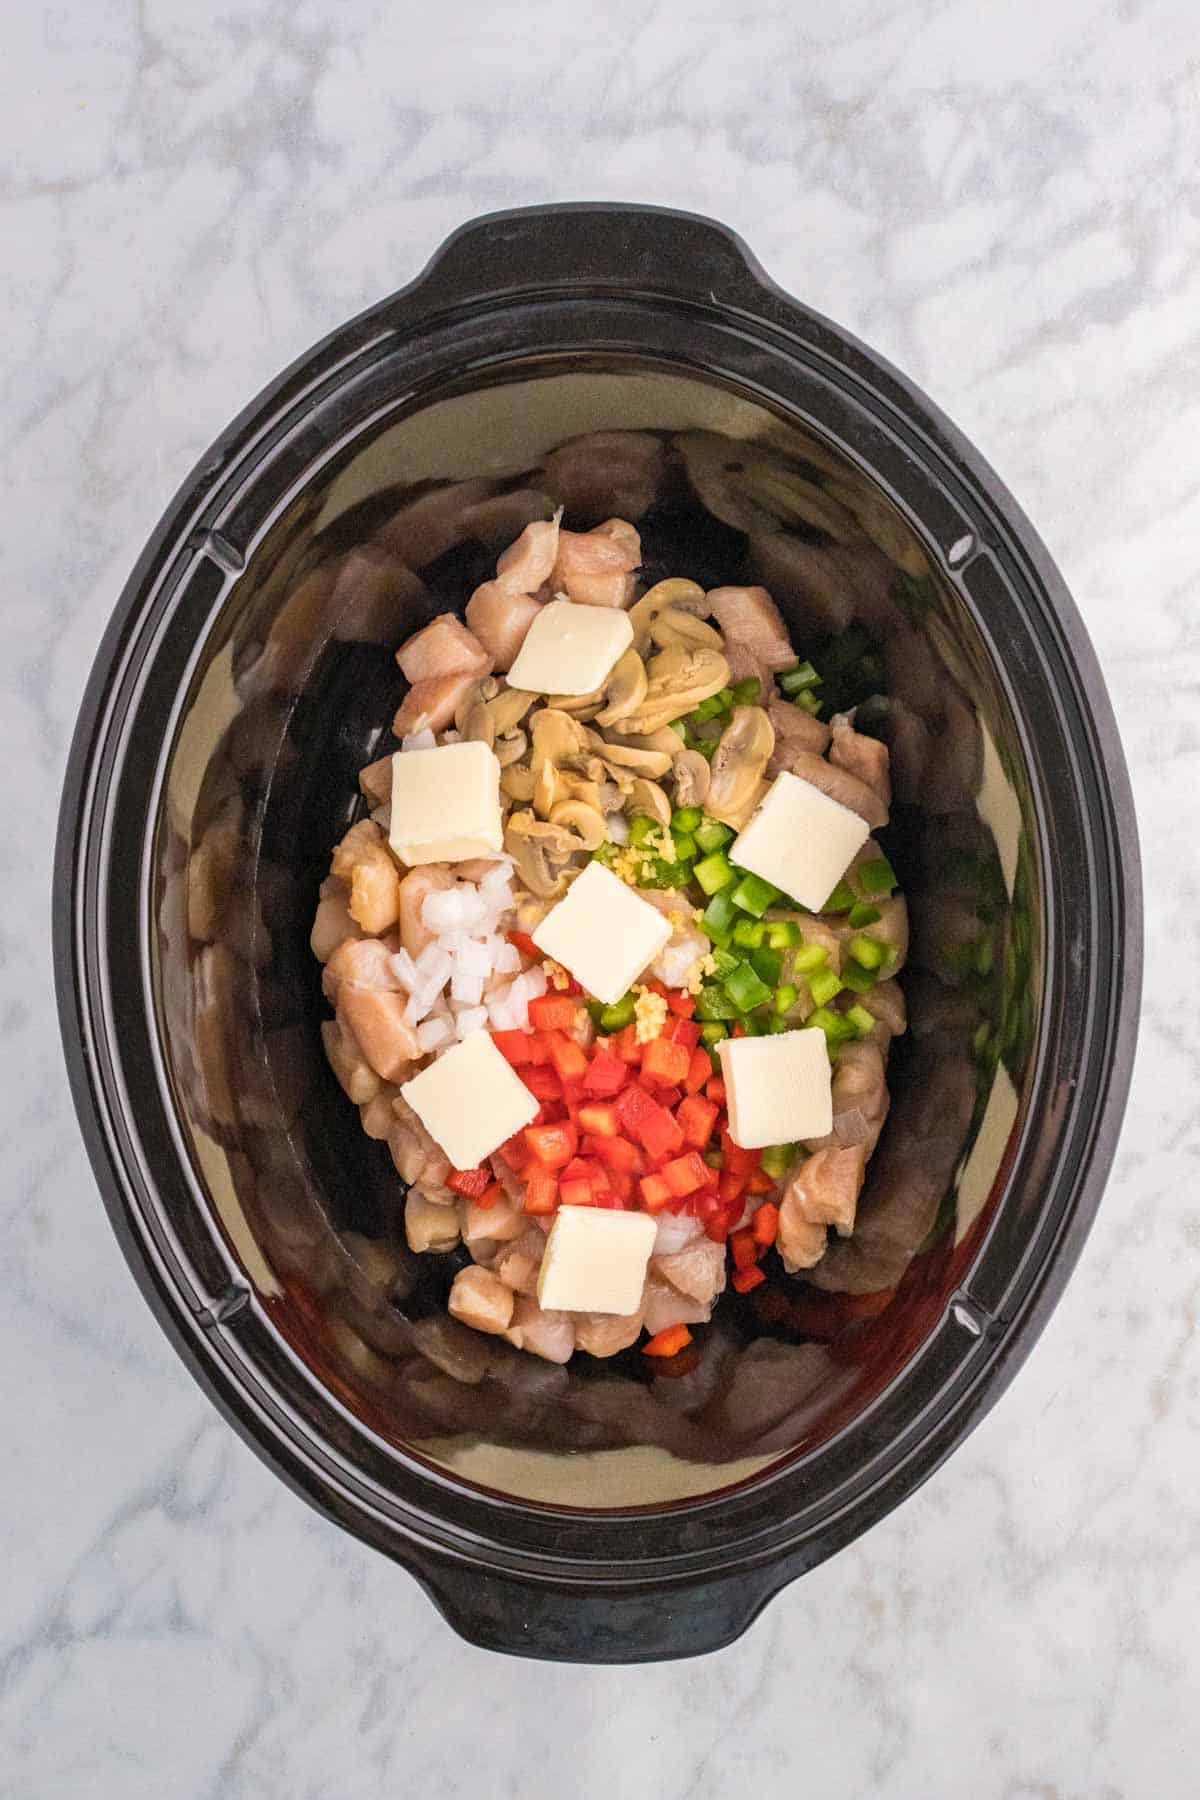 butter squares, chopped veggies and chicken chunks in a slow cooker